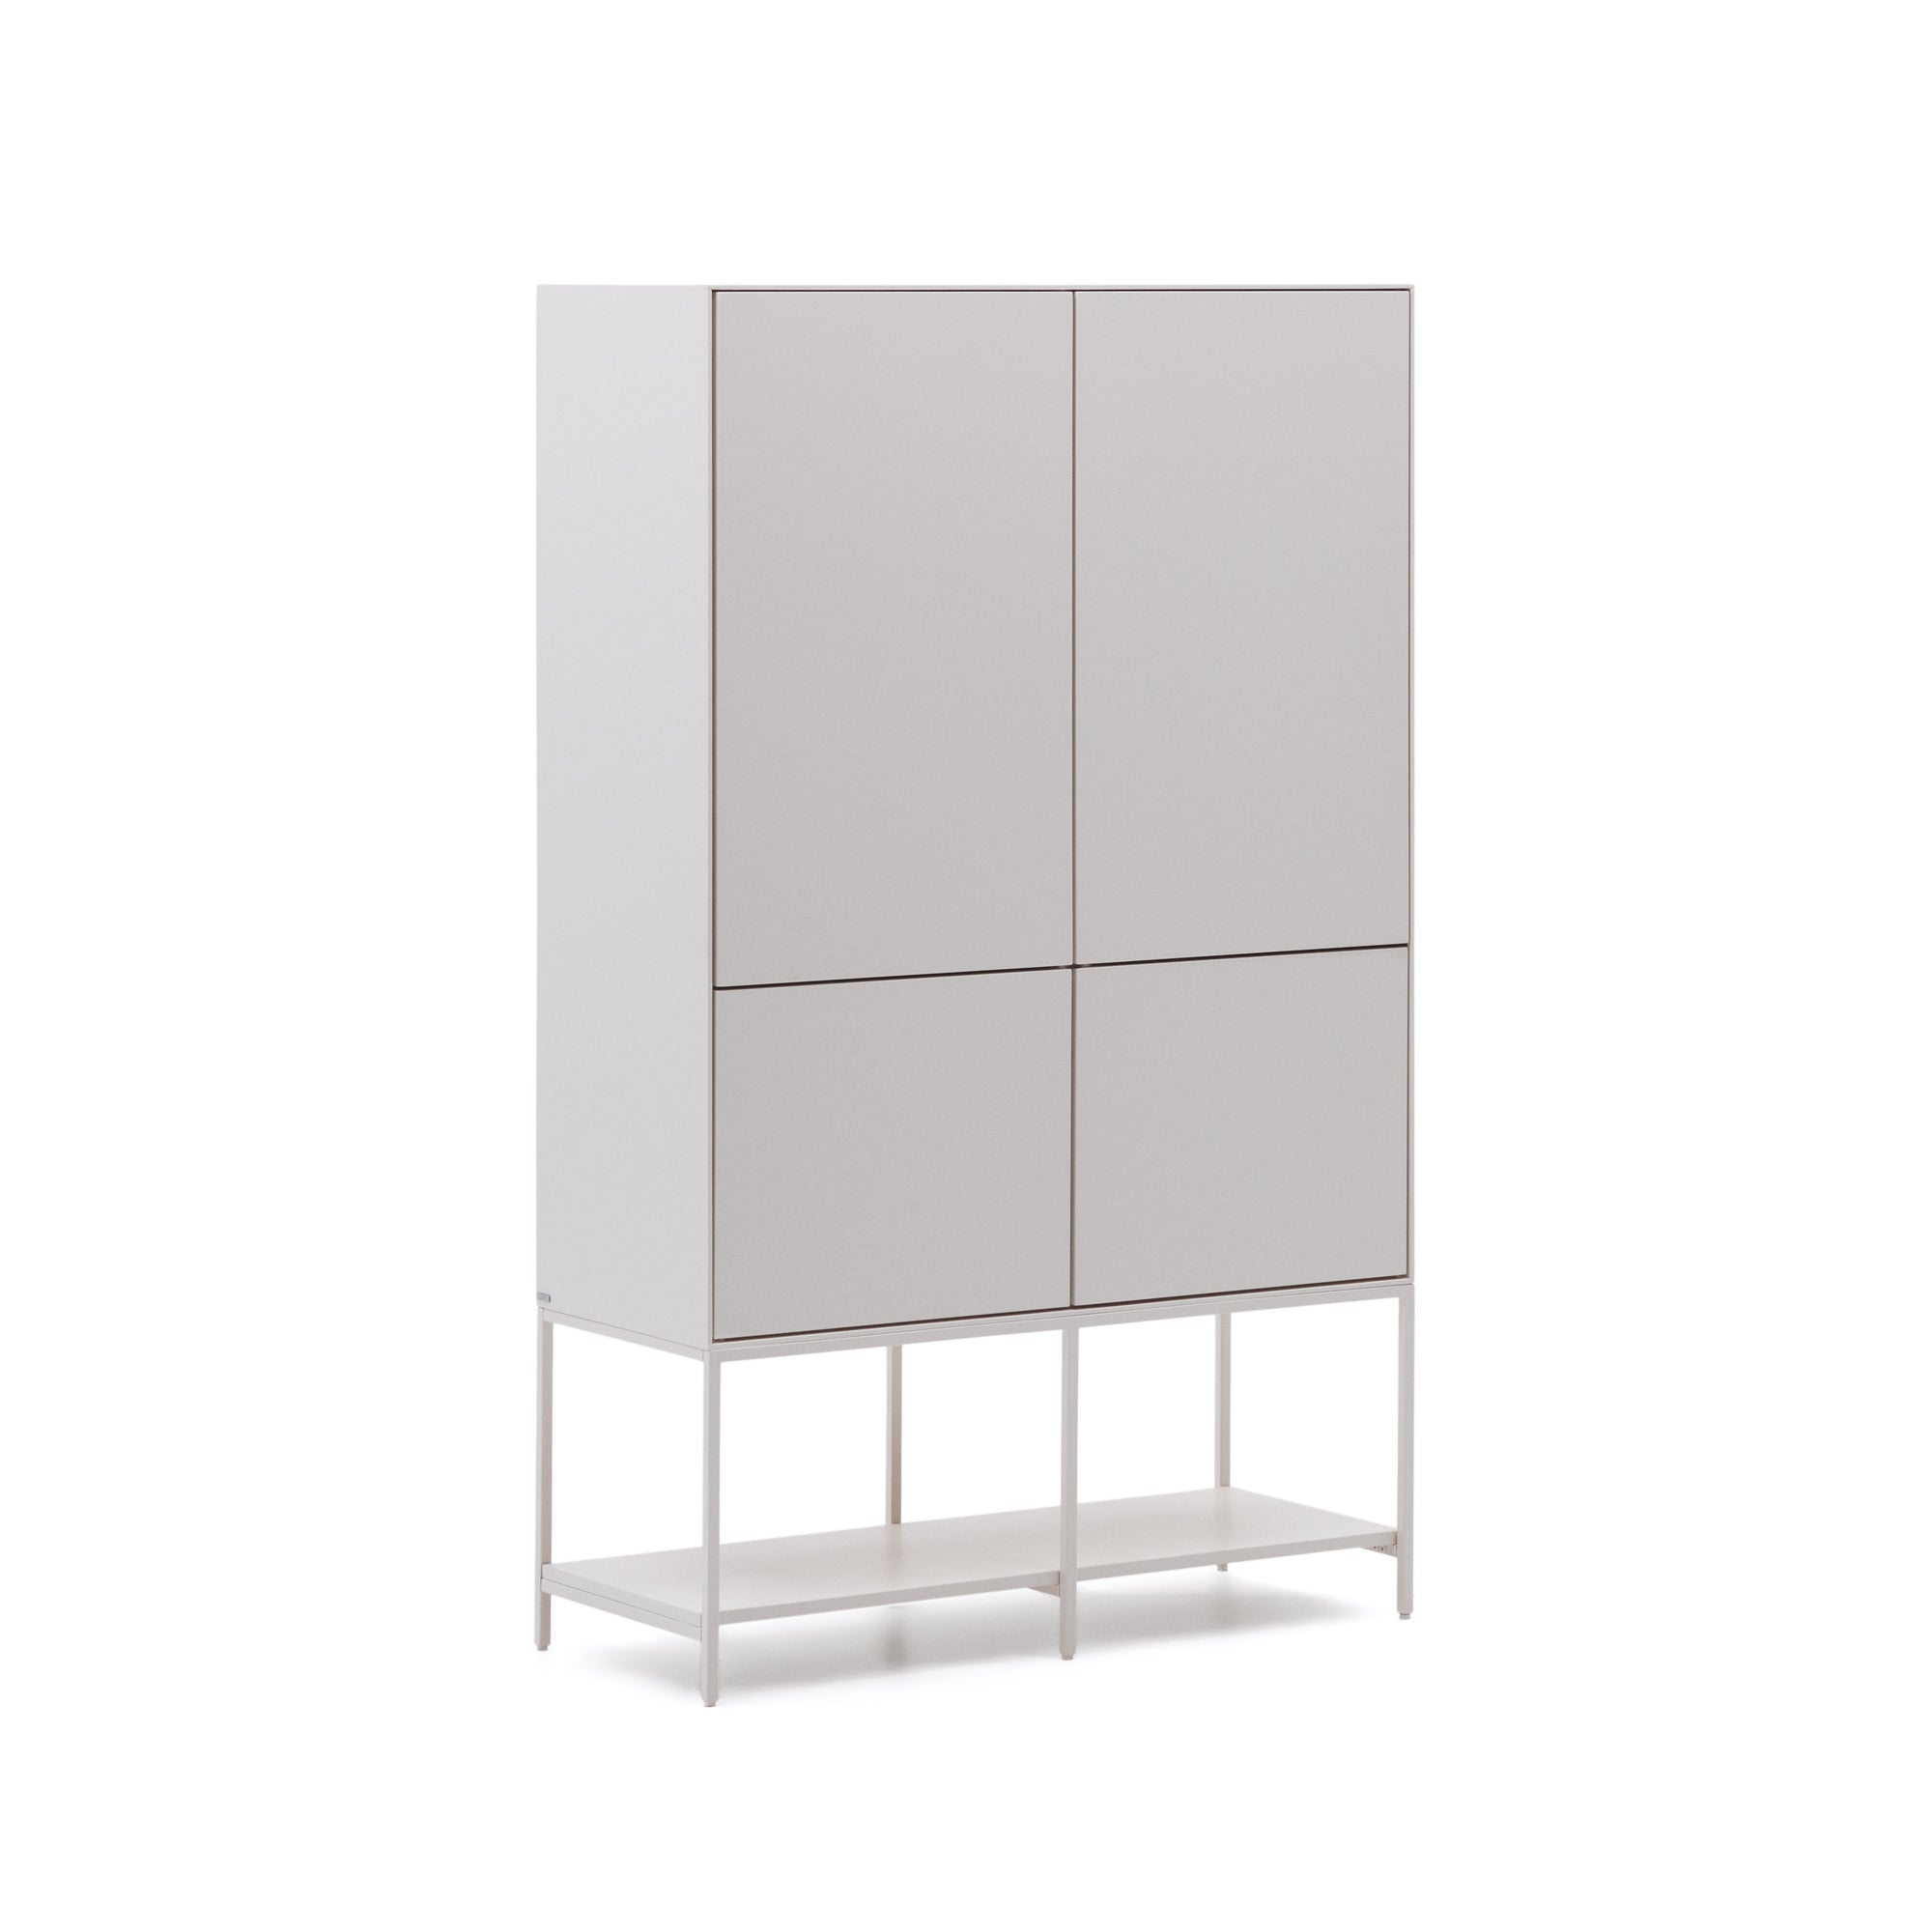 Vedrana 4-door sideboard white lacquered MDF 97.5 x 160 cm